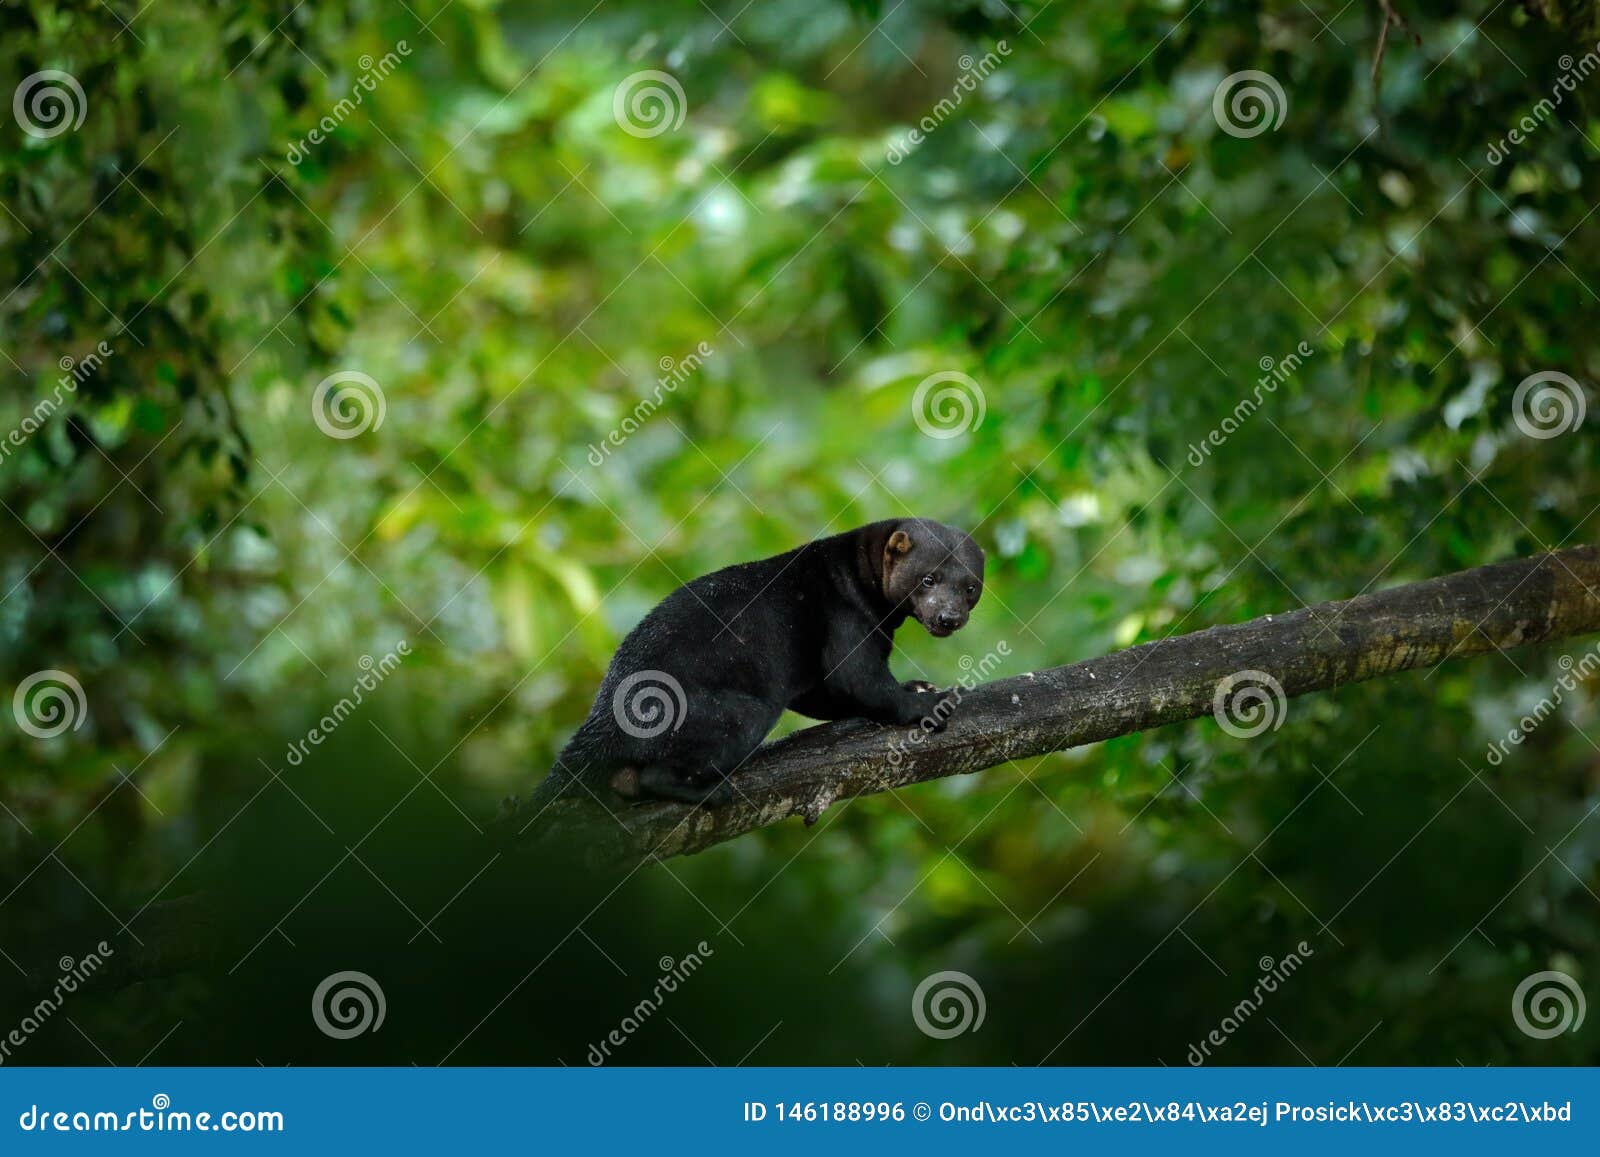 tayra, small predator in the tropic forest. tayra, eira barbara, omnivorous animal from the weasel family. mammal hidden in junge